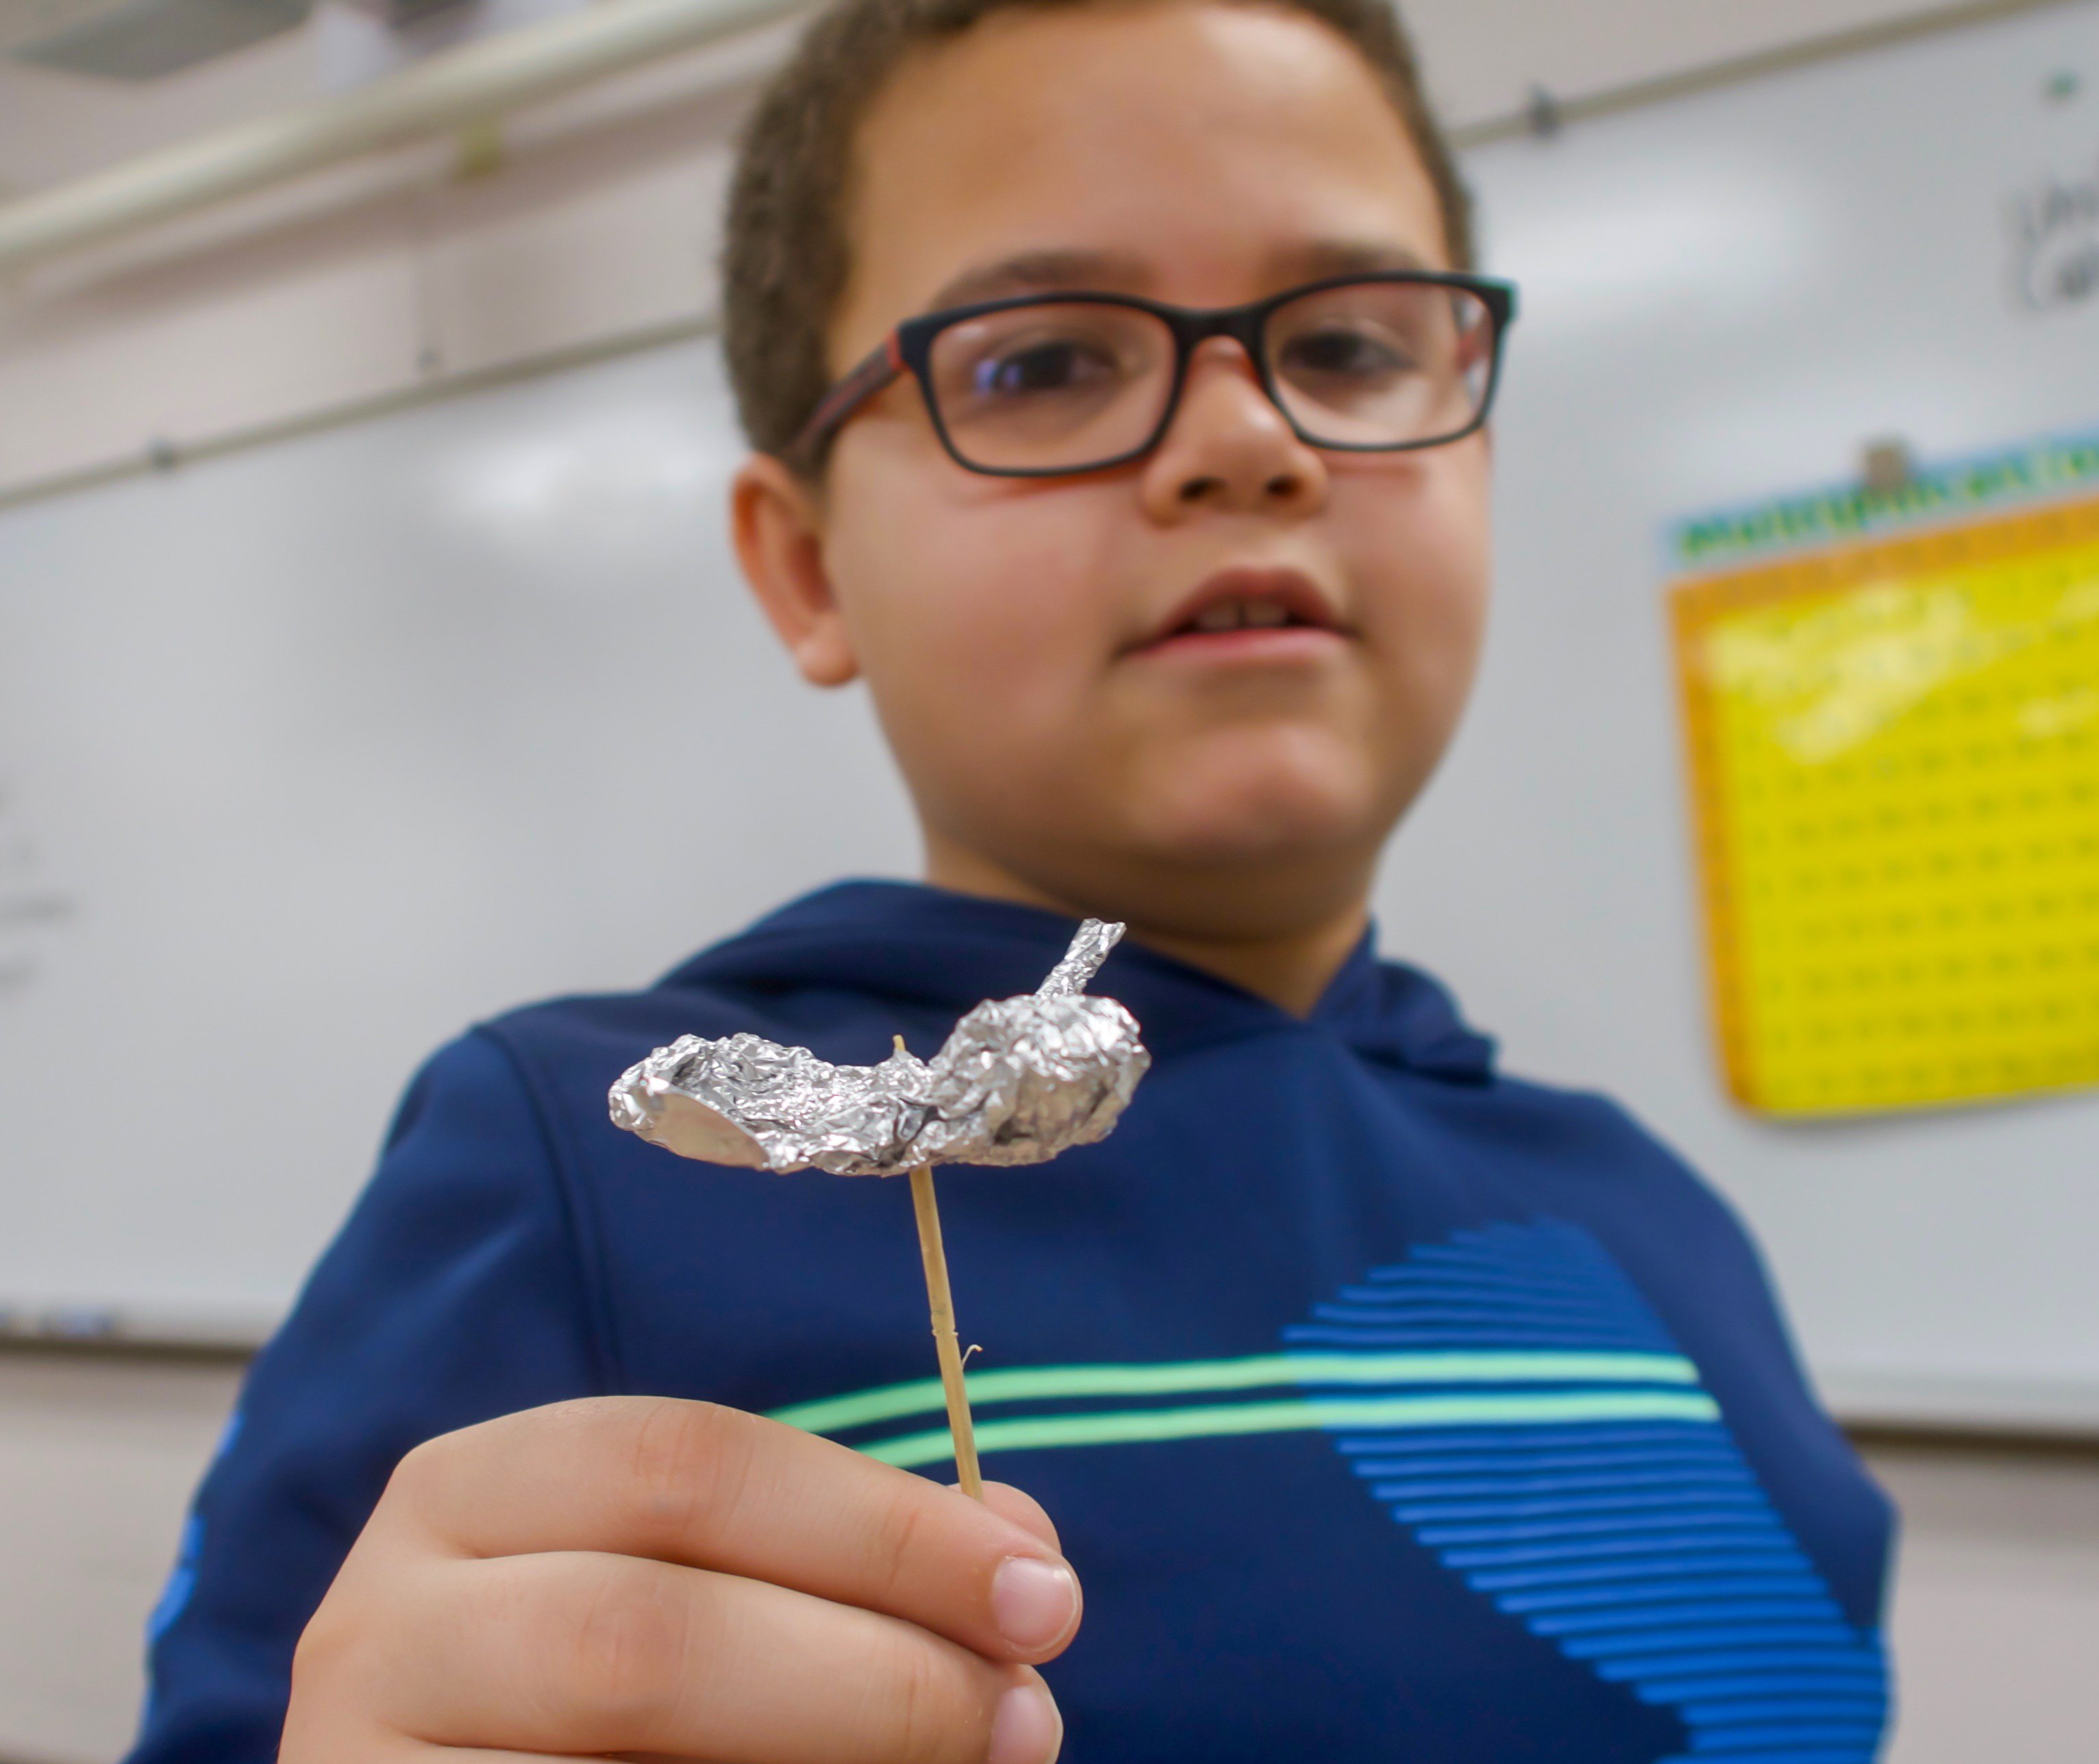 Student shares model of airplane made from aluminum foil.